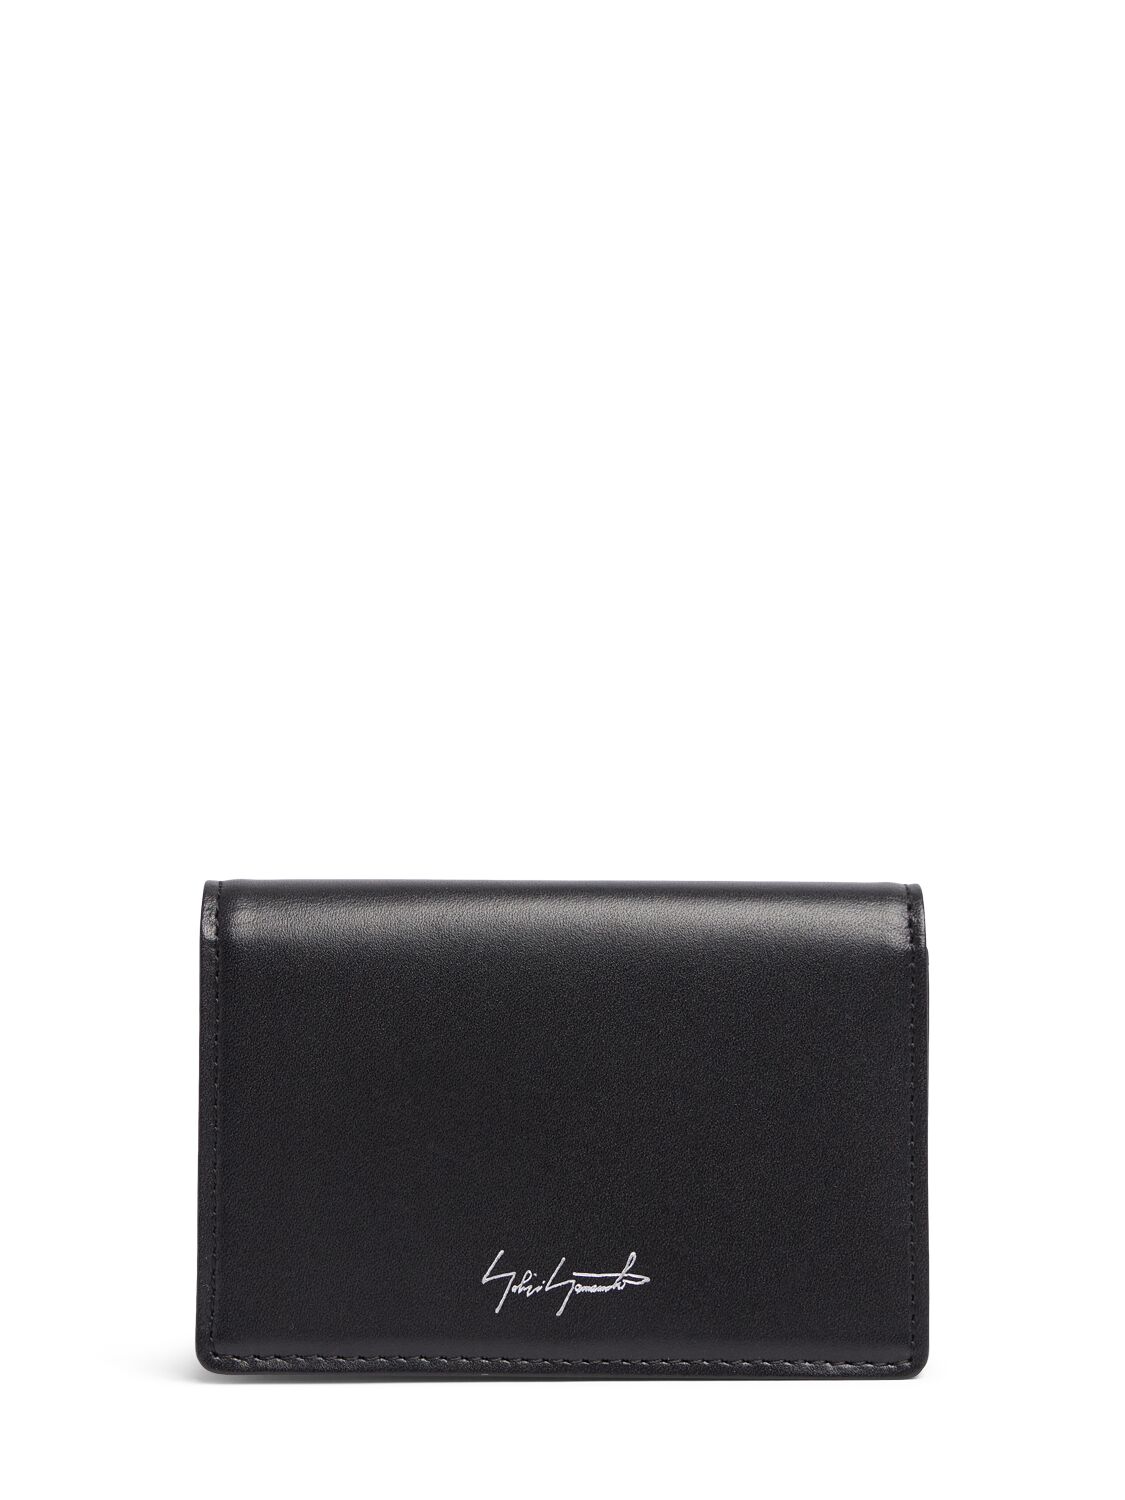 Yohji Yamamoto Gusseted Leather Business Card Case In Black